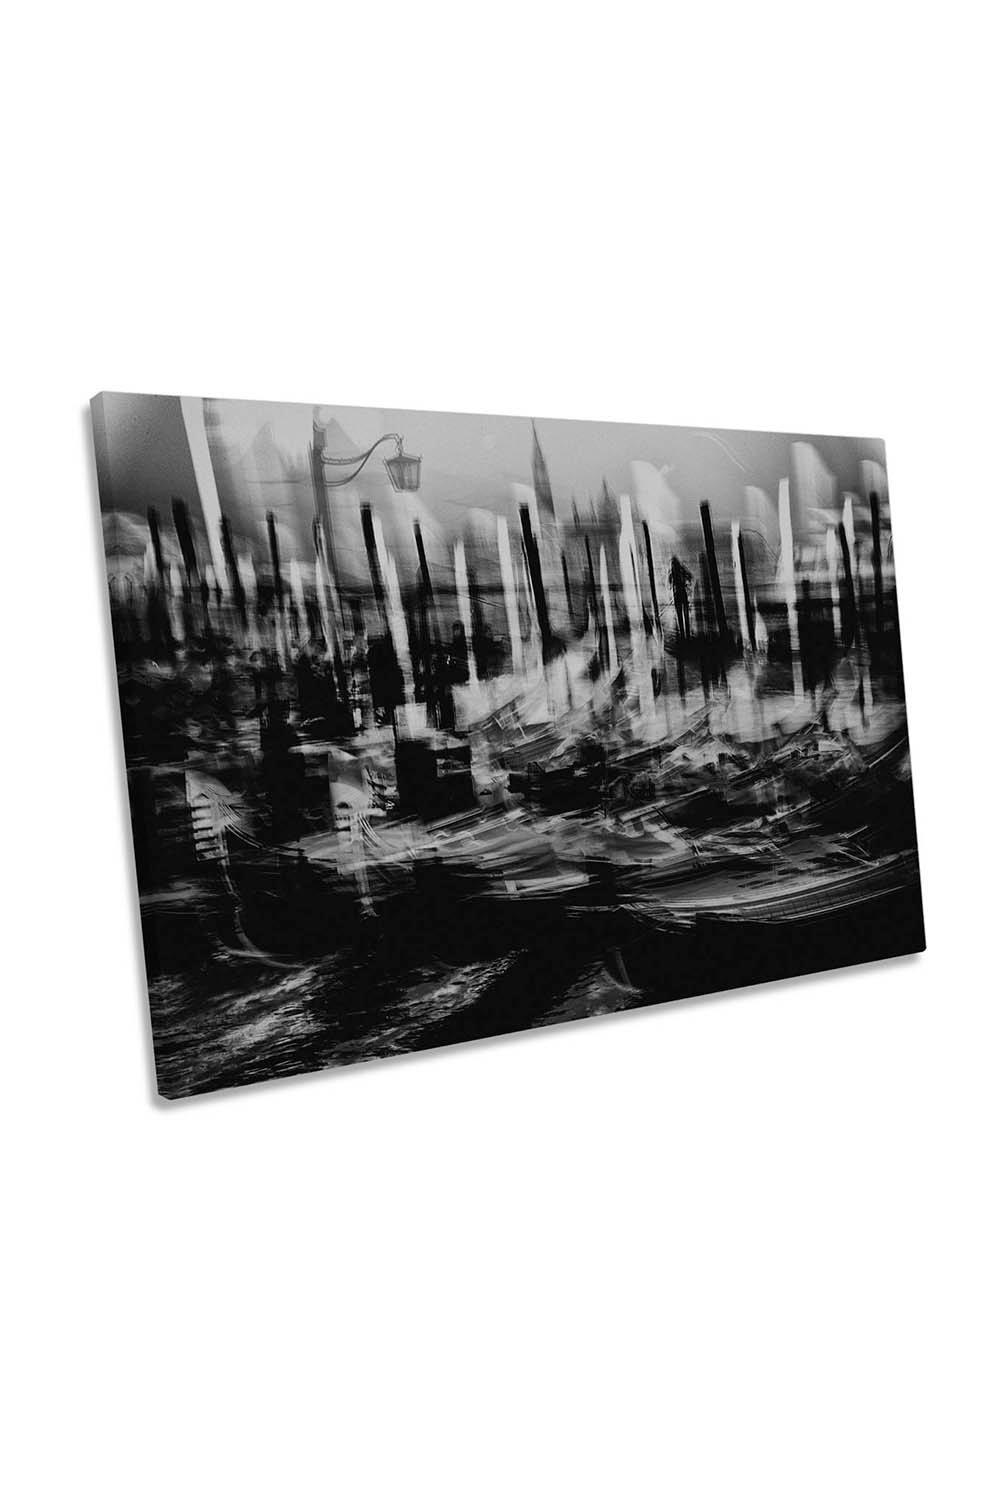 Symbolism in Venice Canal Abstract Canvas Wall Art Picture Print